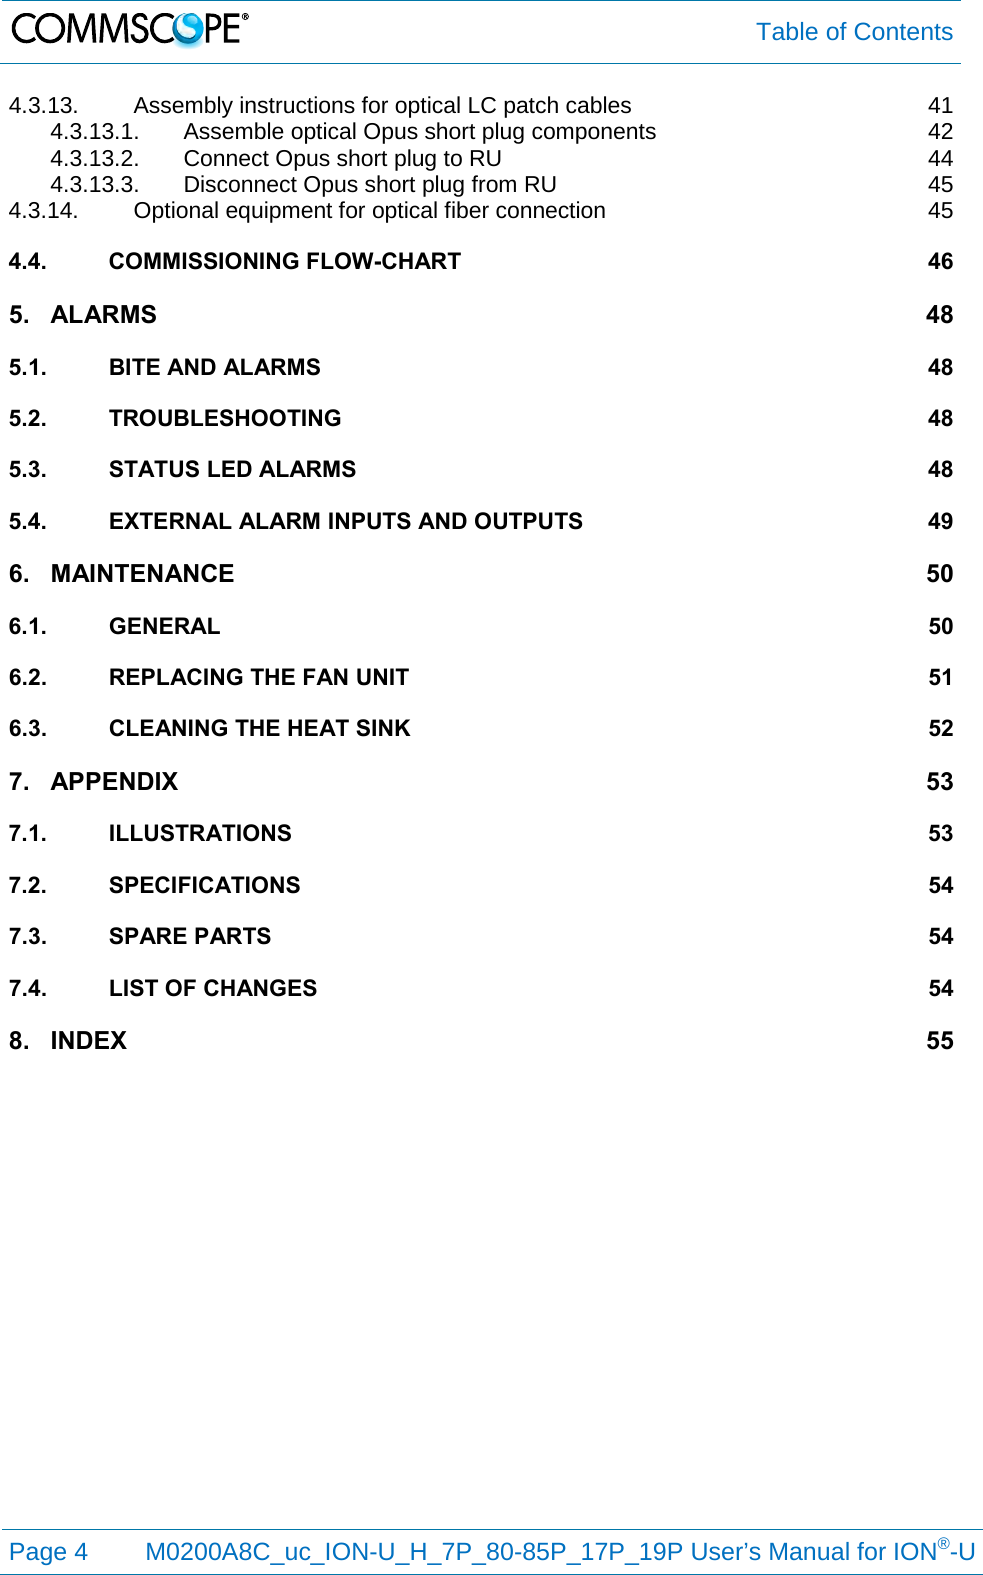  Table of Contents  Page 4  M0200A8C_uc_ION-U_H_7P_80-85P_17P_19P User’s Manual for ION®-U  4.3.13. Assembly instructions for optical LC patch cables 41 4.3.13.1. Assemble optical Opus short plug components 42 4.3.13.2. Connect Opus short plug to RU 44 4.3.13.3. Disconnect Opus short plug from RU 45 4.3.14. Optional equipment for optical fiber connection 45 4.4. COMMISSIONING FLOW-CHART 46 5. ALARMS 48 5.1. BITE AND ALARMS 48 5.2. TROUBLESHOOTING 48 5.3. STATUS LED ALARMS 48 5.4. EXTERNAL ALARM INPUTS AND OUTPUTS 49 6. MAINTENANCE 50 6.1. GENERAL 50 6.2. REPLACING THE FAN UNIT 51 6.3. CLEANING THE HEAT SINK 52 7. APPENDIX 53 7.1. ILLUSTRATIONS 53 7.2. SPECIFICATIONS 54 7.3. SPARE PARTS 54 7.4. LIST OF CHANGES 54 8. INDEX 55  